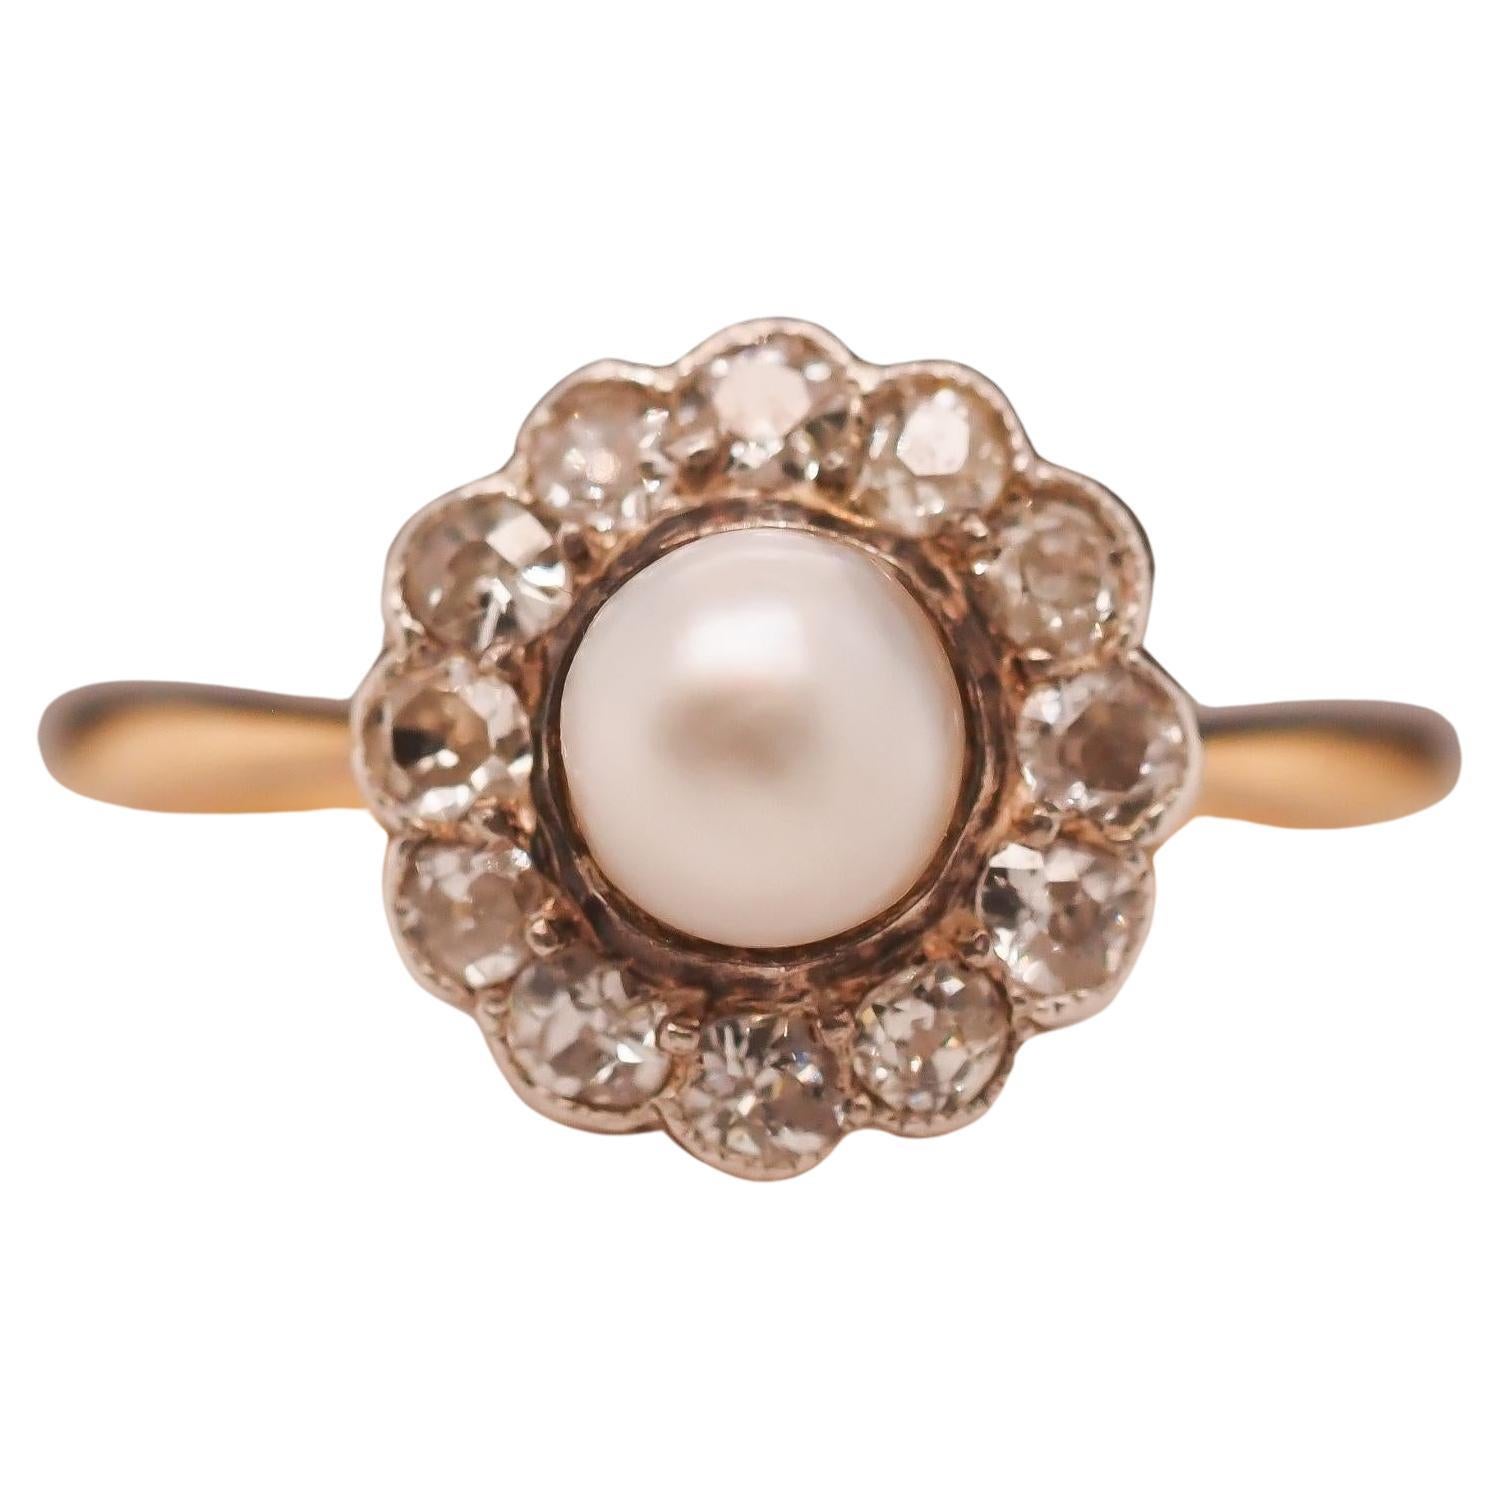 Circa 1900s Edwardian 14K Yellow Gold Pearl and Old European Diamond Ring For Sale